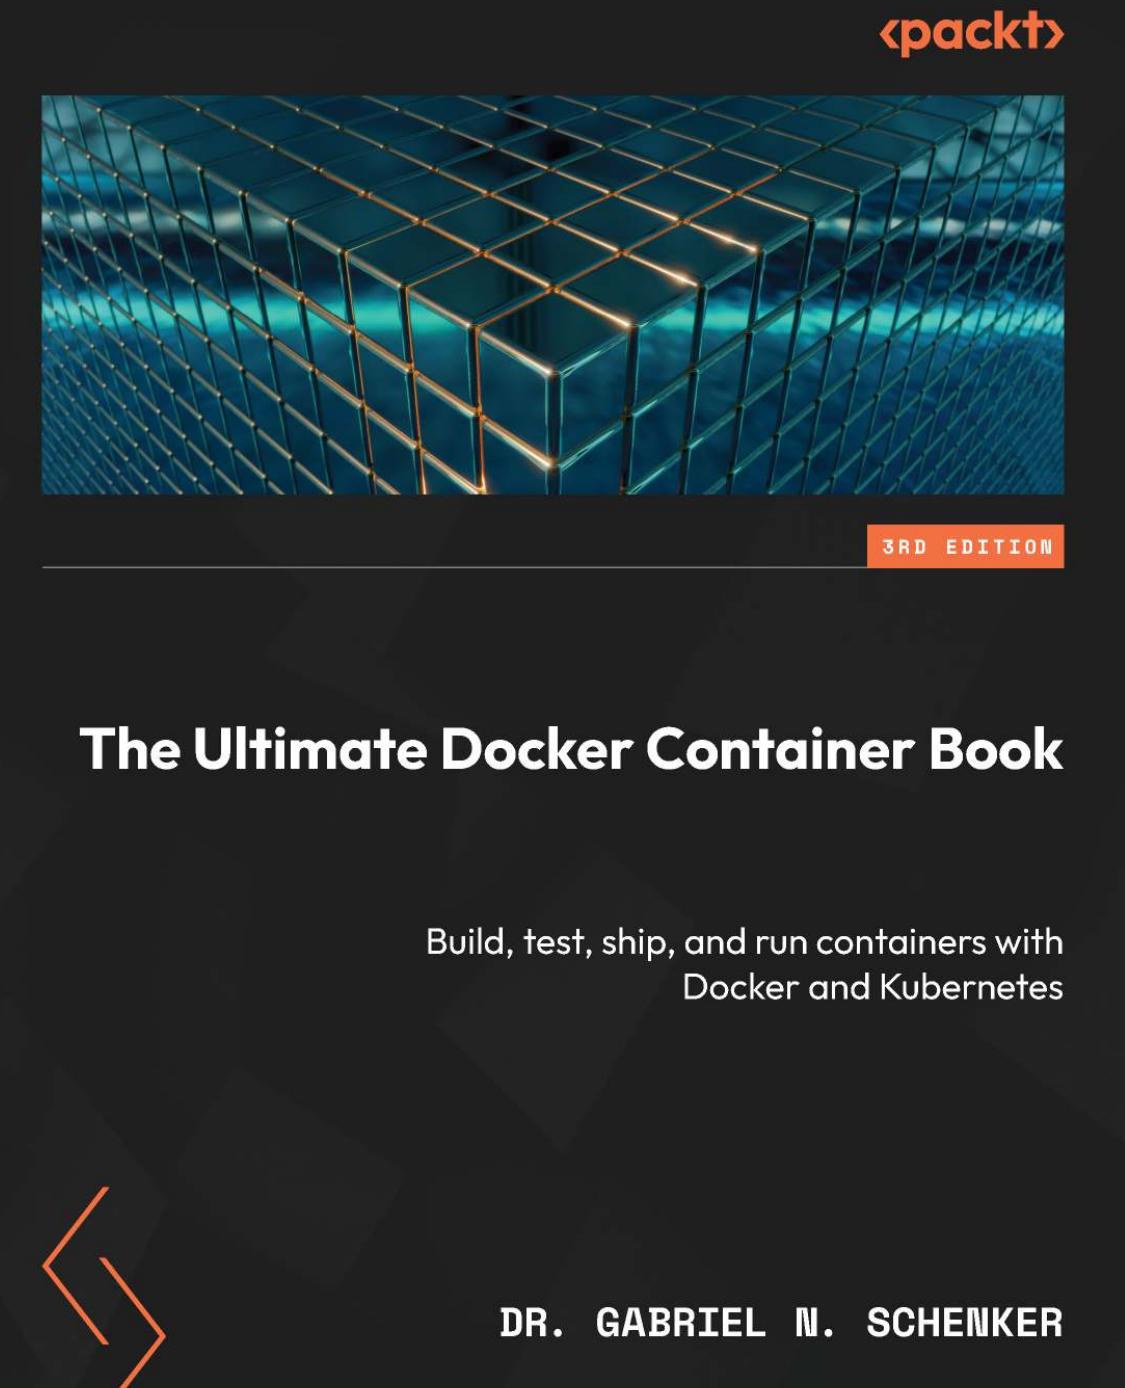 The Ultimate Docker Container Book: Build, Test, Ship, and Run Containers With Docker and Kubernetes